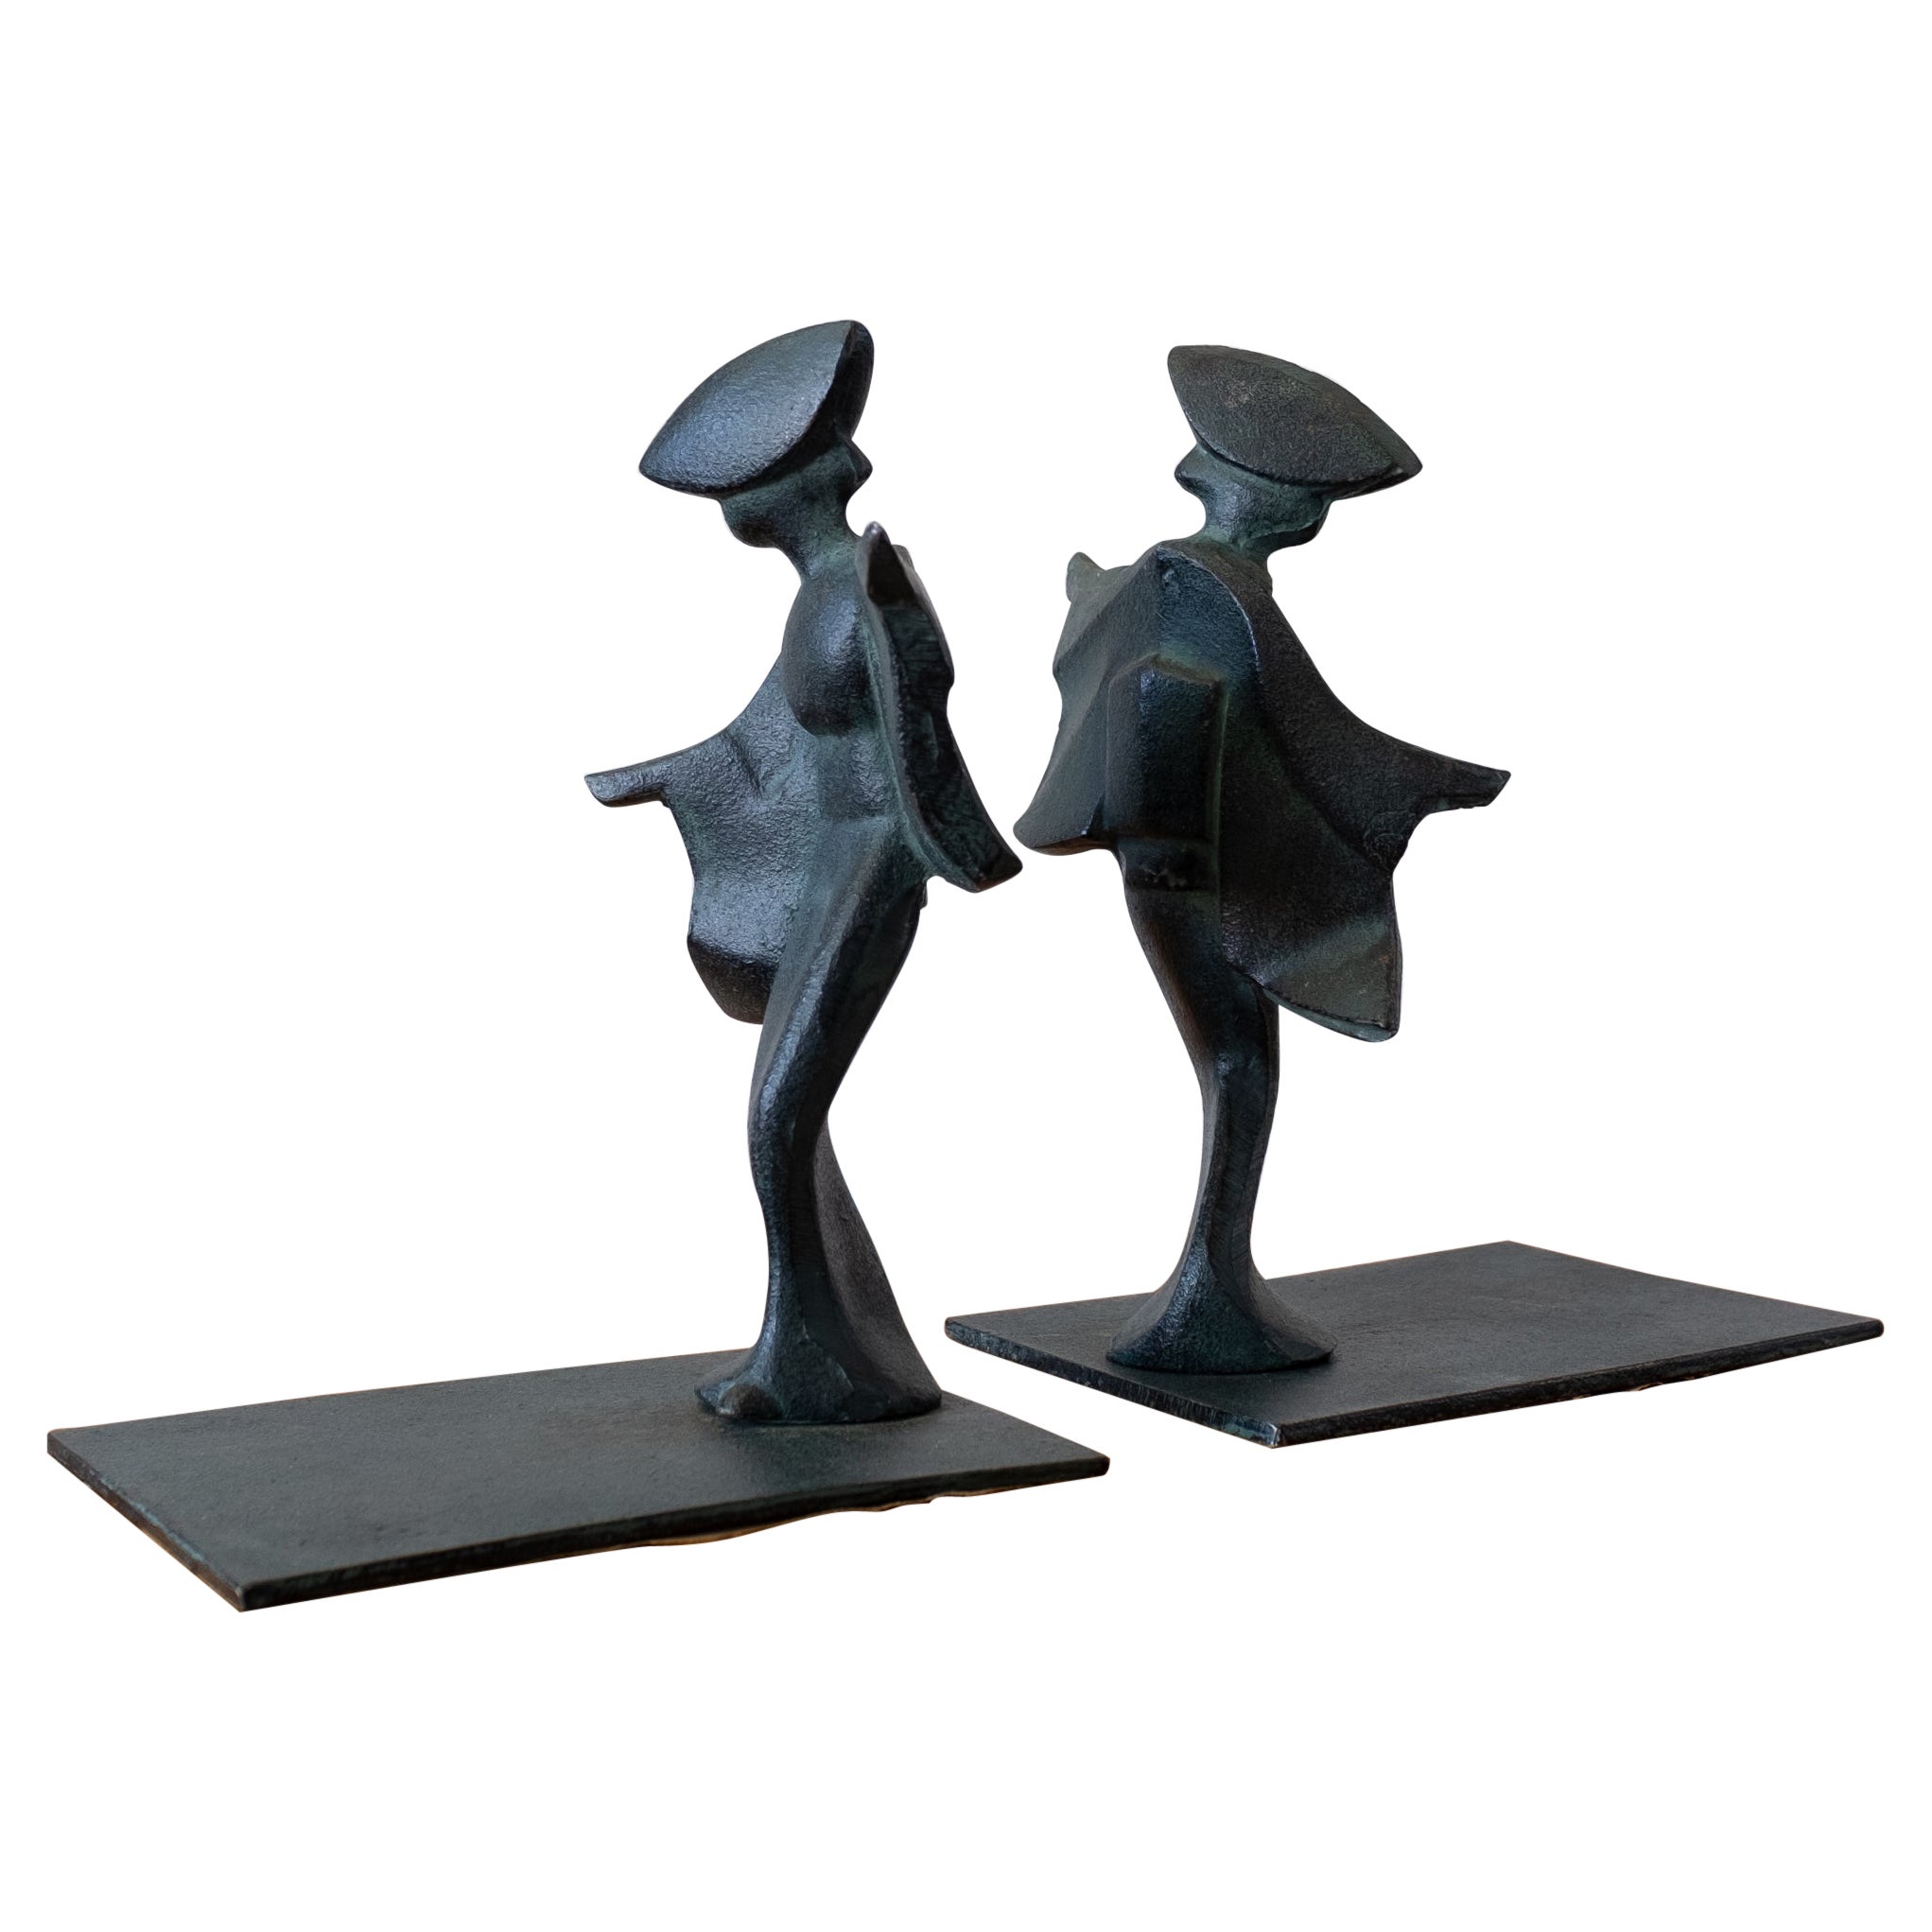 Midcentury Japanese Iron Bookends